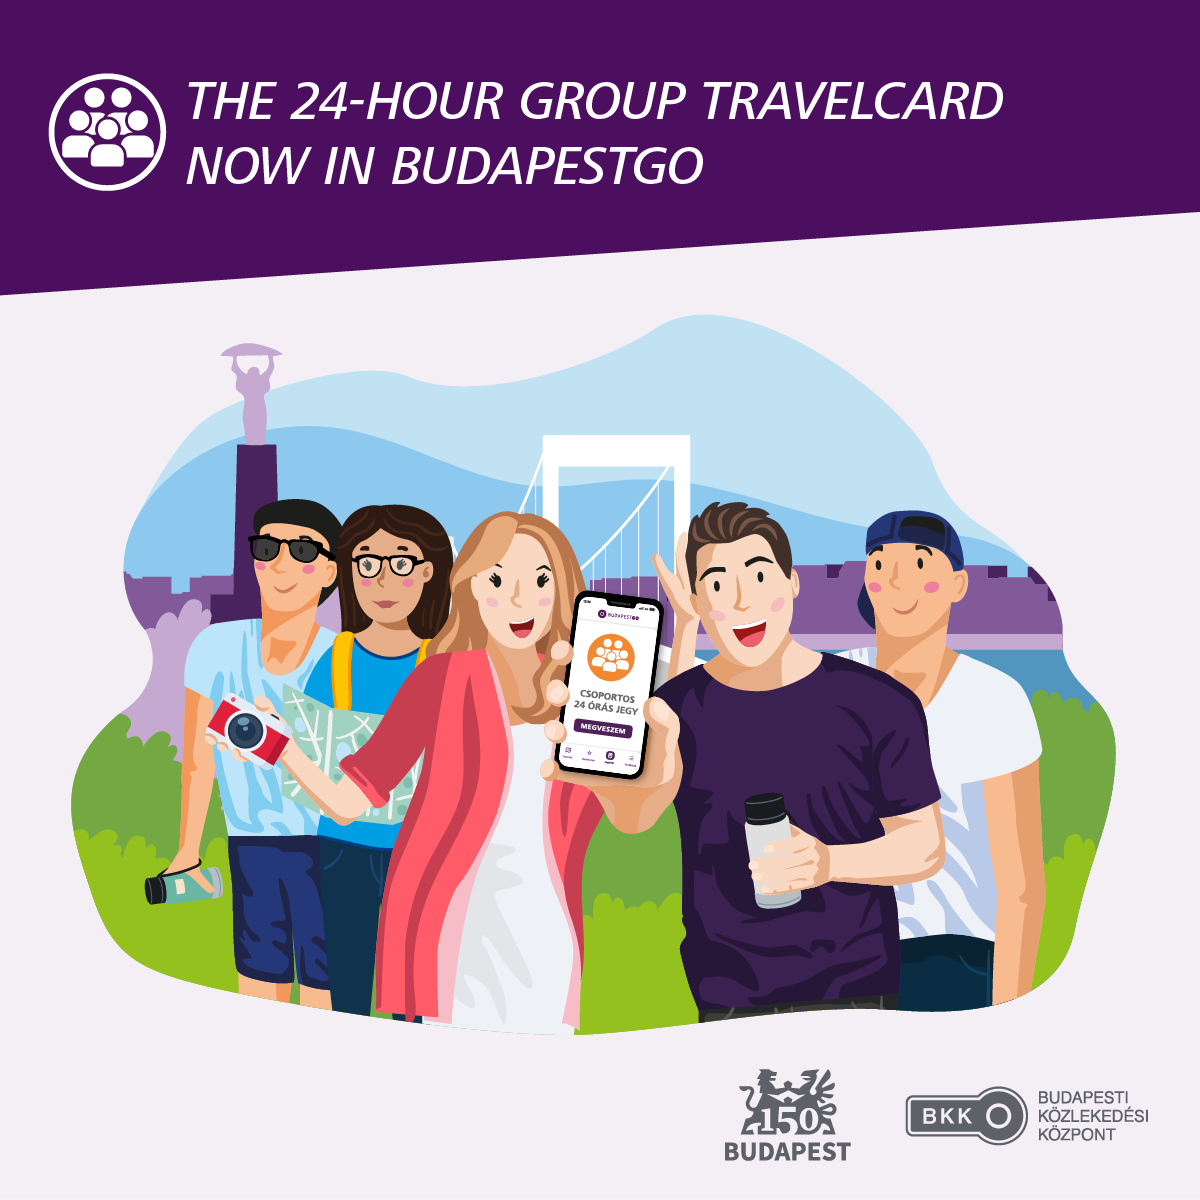 How to use the 24-hour group travelcard